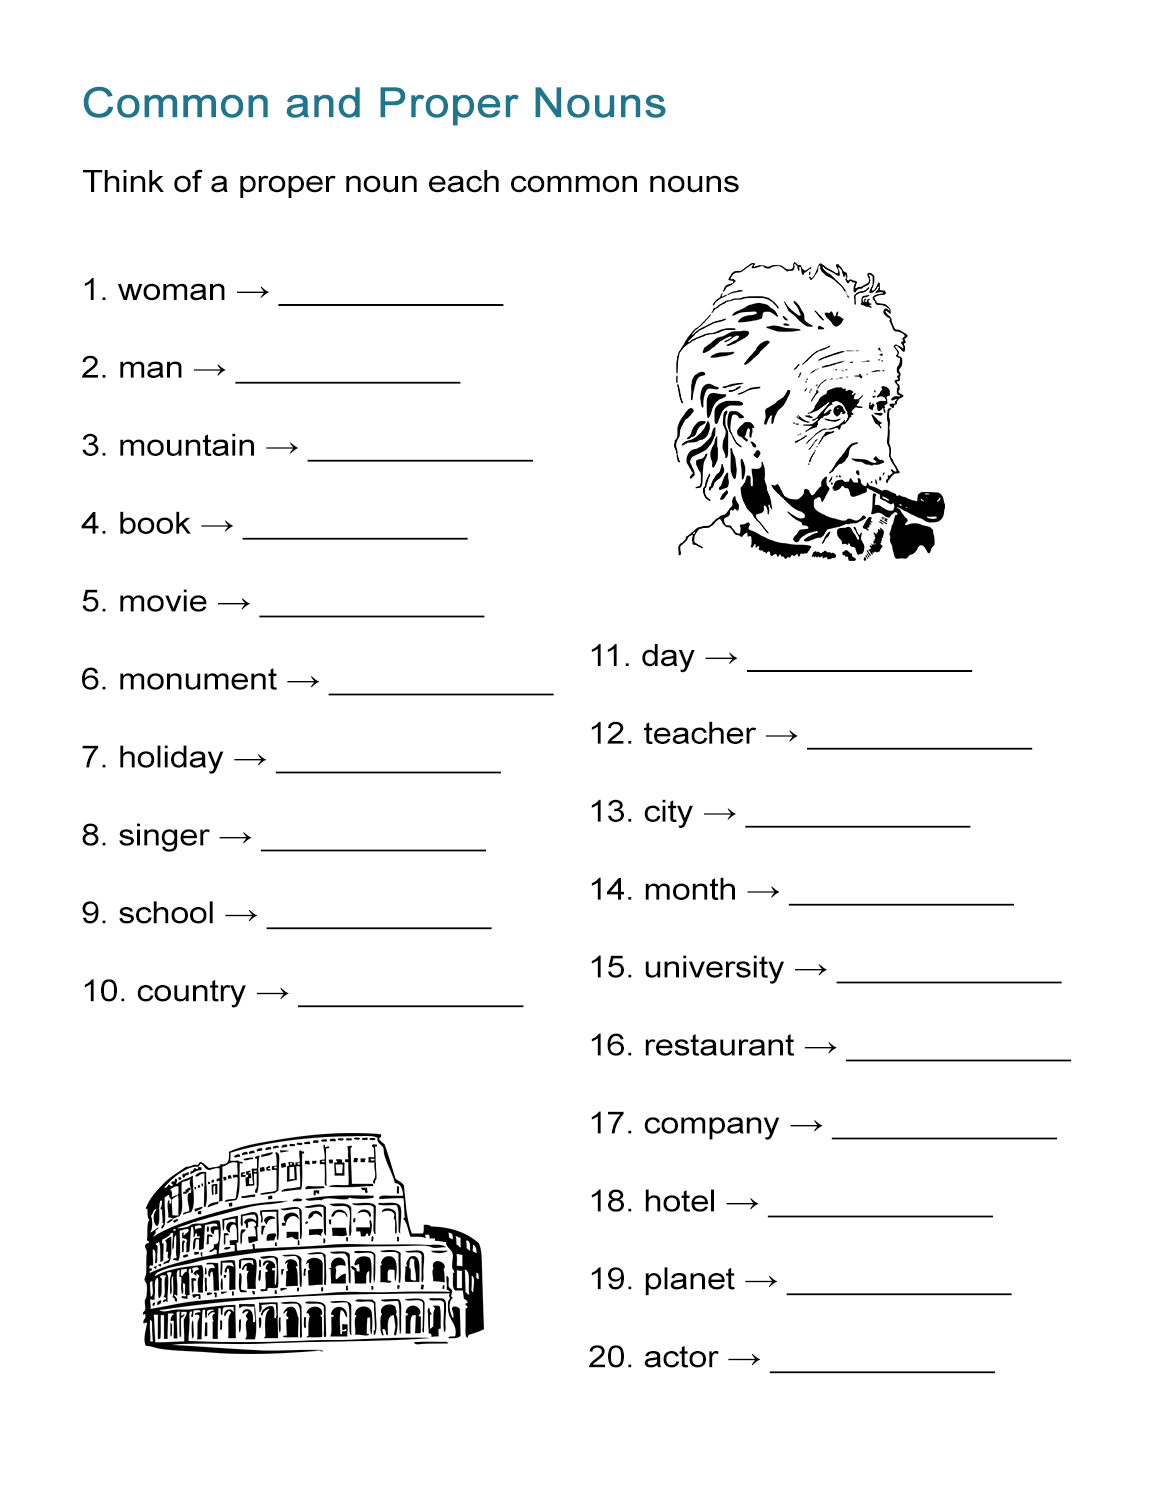 Common and Proper Nouns Worksheet [Brainstorming Activity] - ALL ESL With Types Of Nouns Worksheet